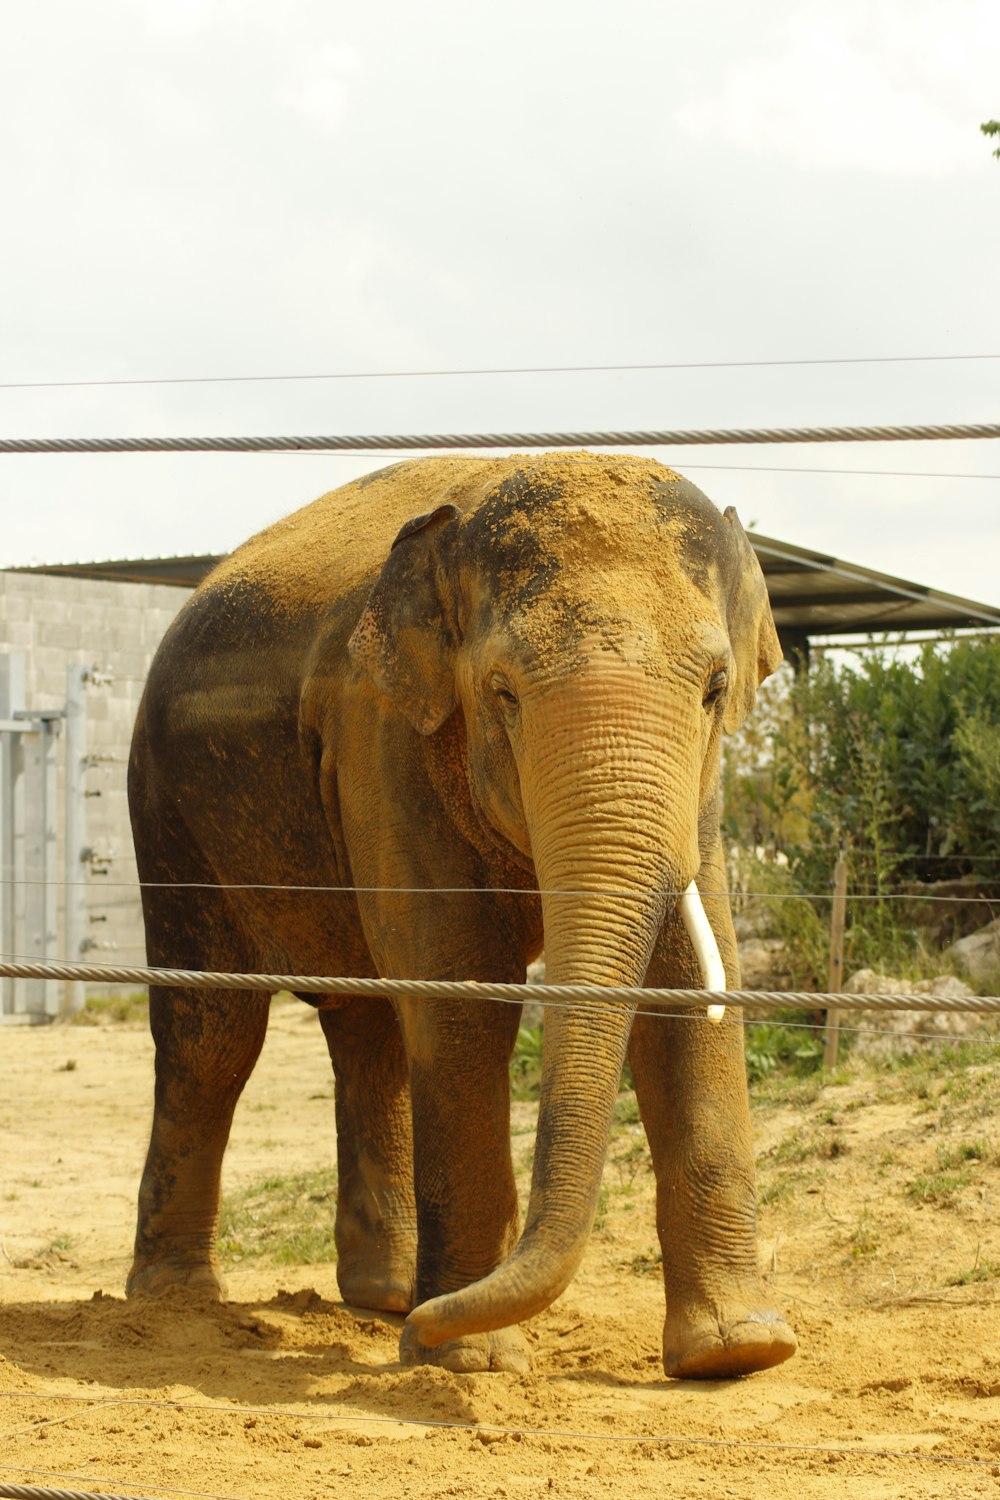 an elephant standing in the dirt behind a wire fence